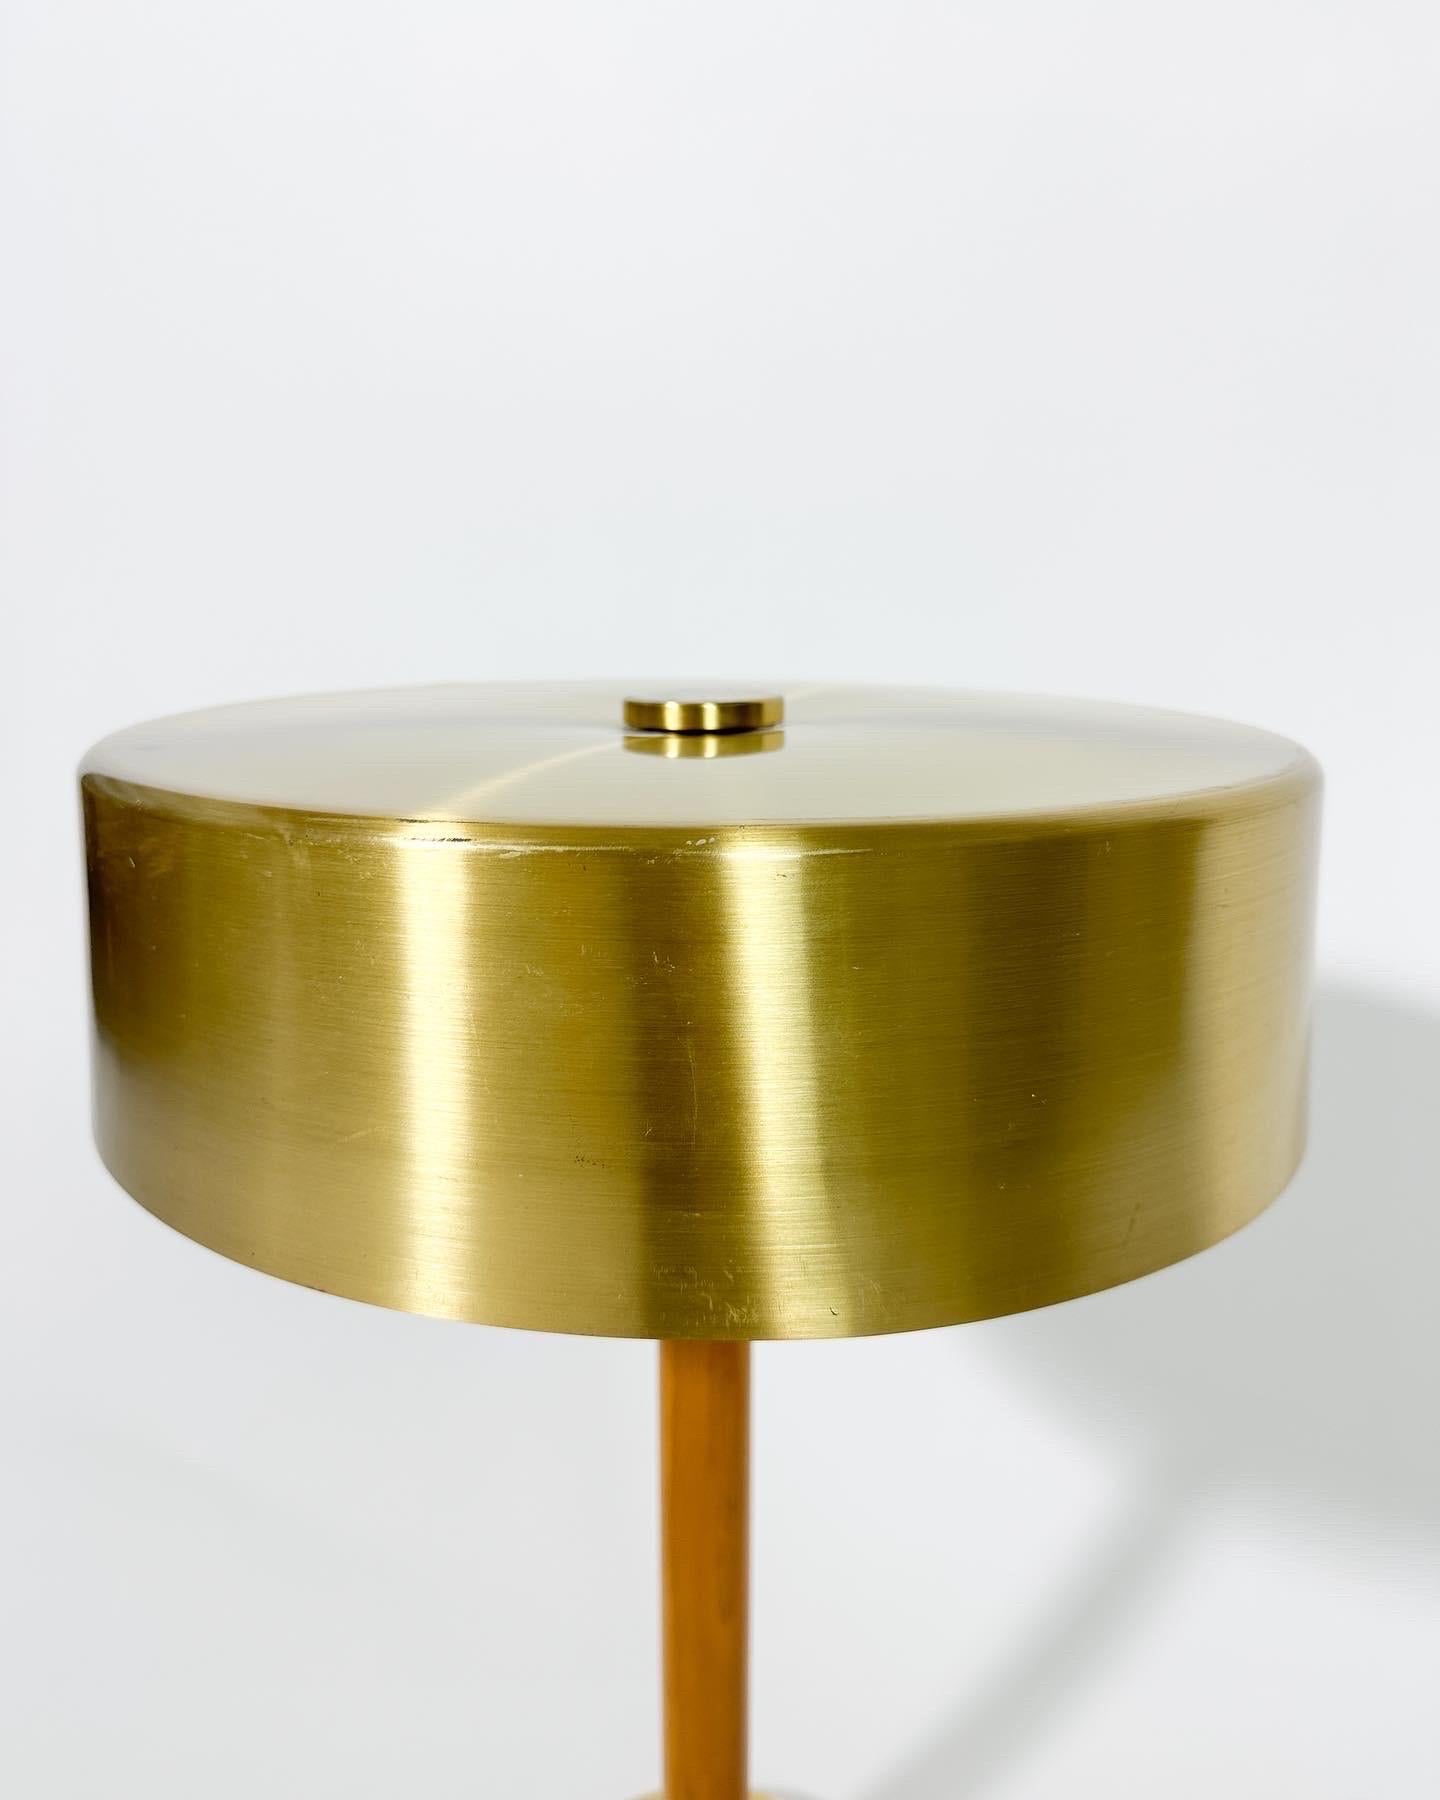 Hand-Crafted Swedish Brass Table Lamp Borens Boras Sweden 1960s For Sale